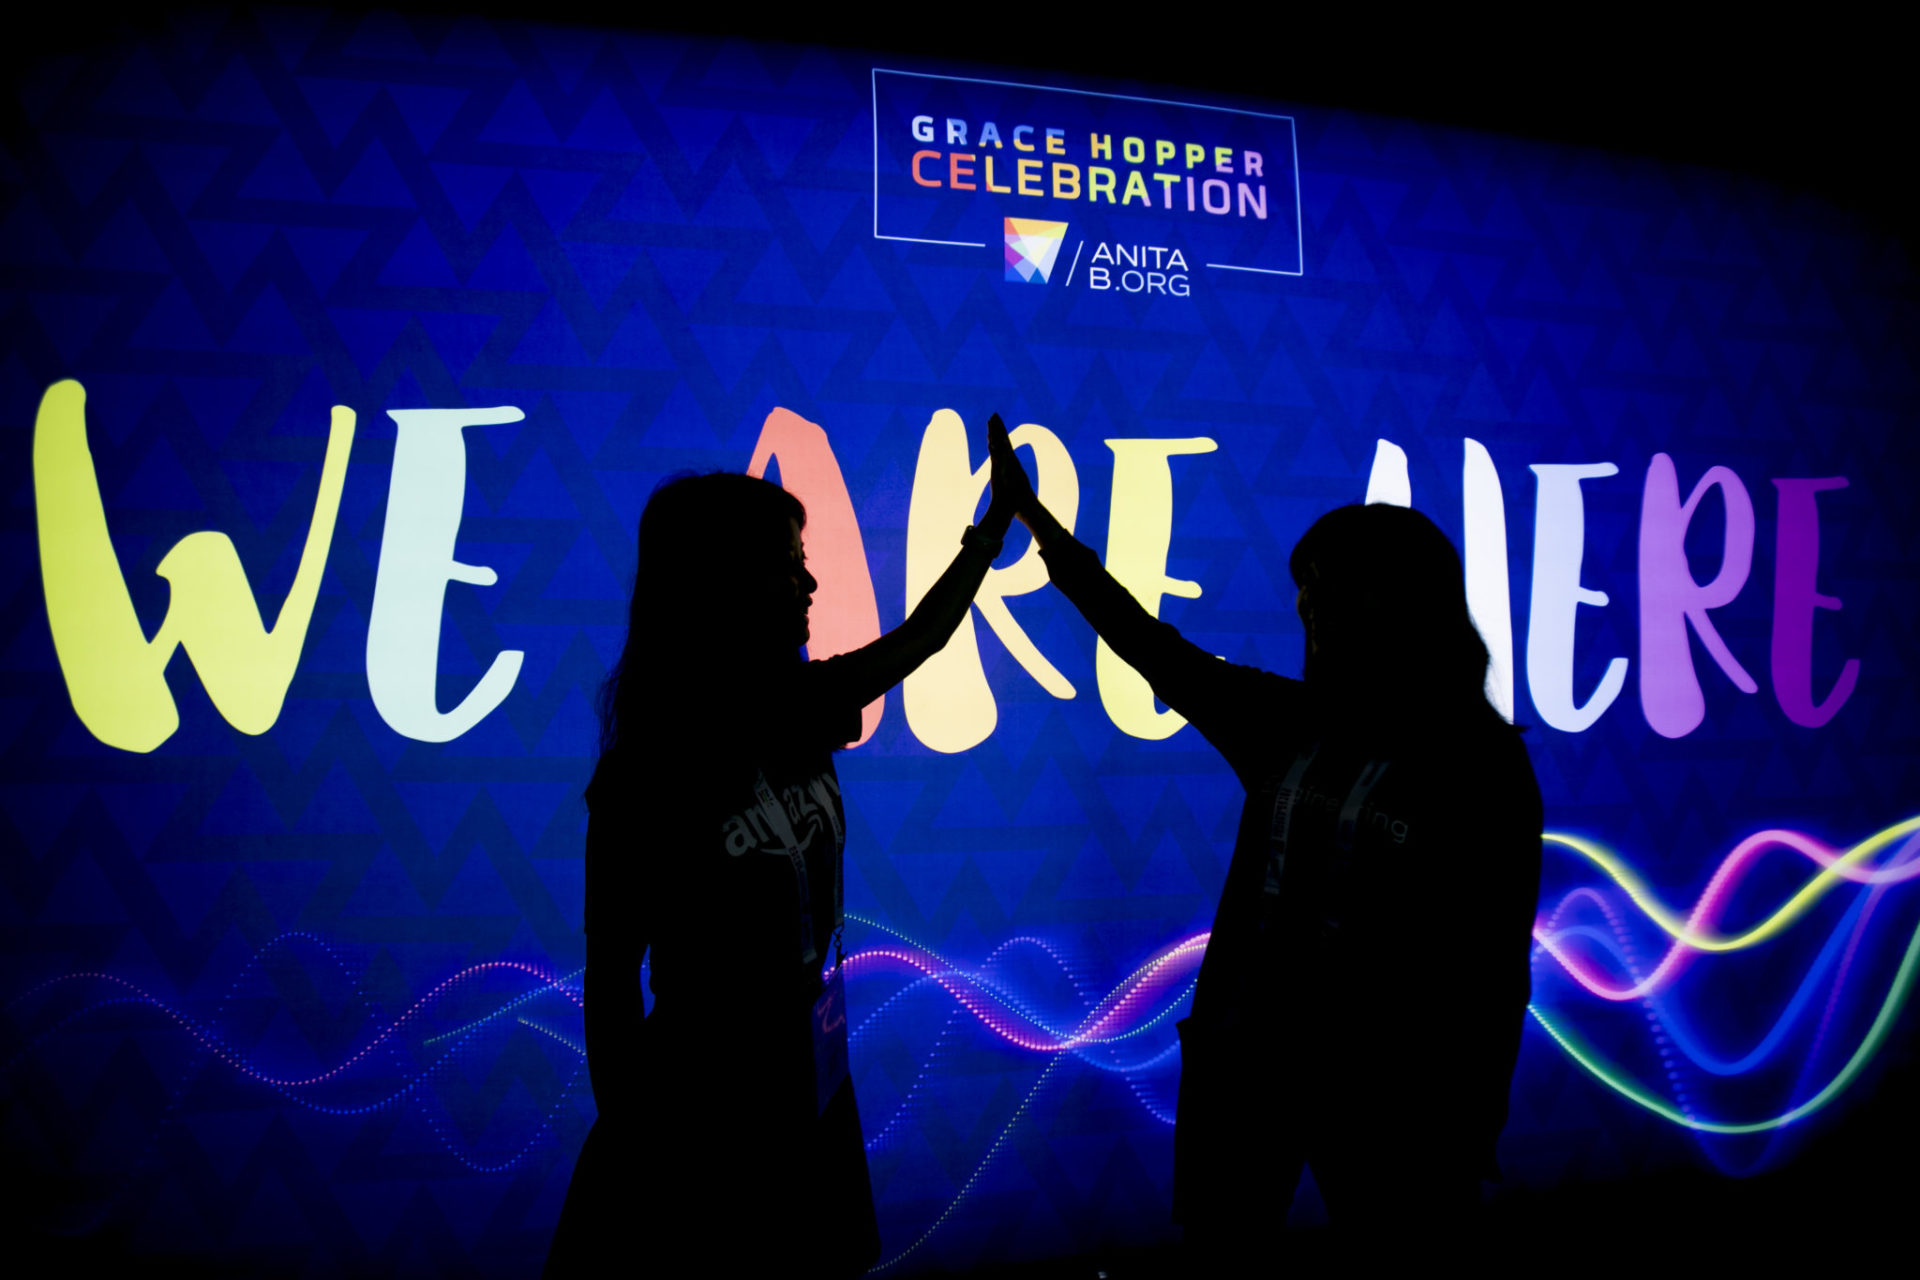 To women highfive in front of a light-up "We Are Here" sign